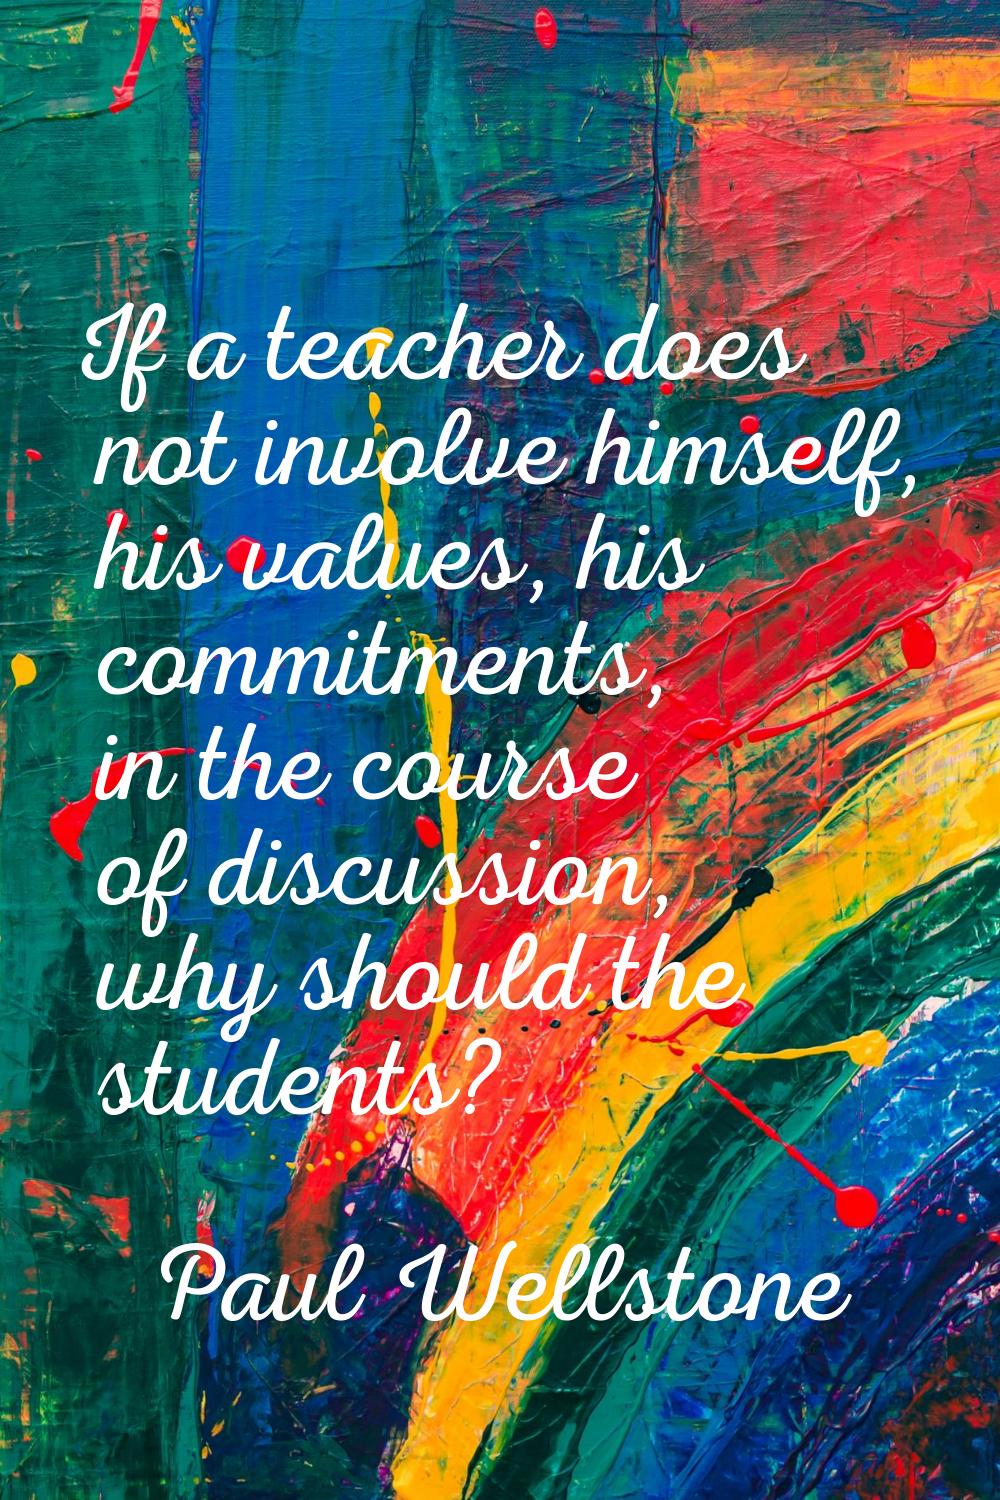 If a teacher does not involve himself, his values, his commitments, in the course of discussion, wh